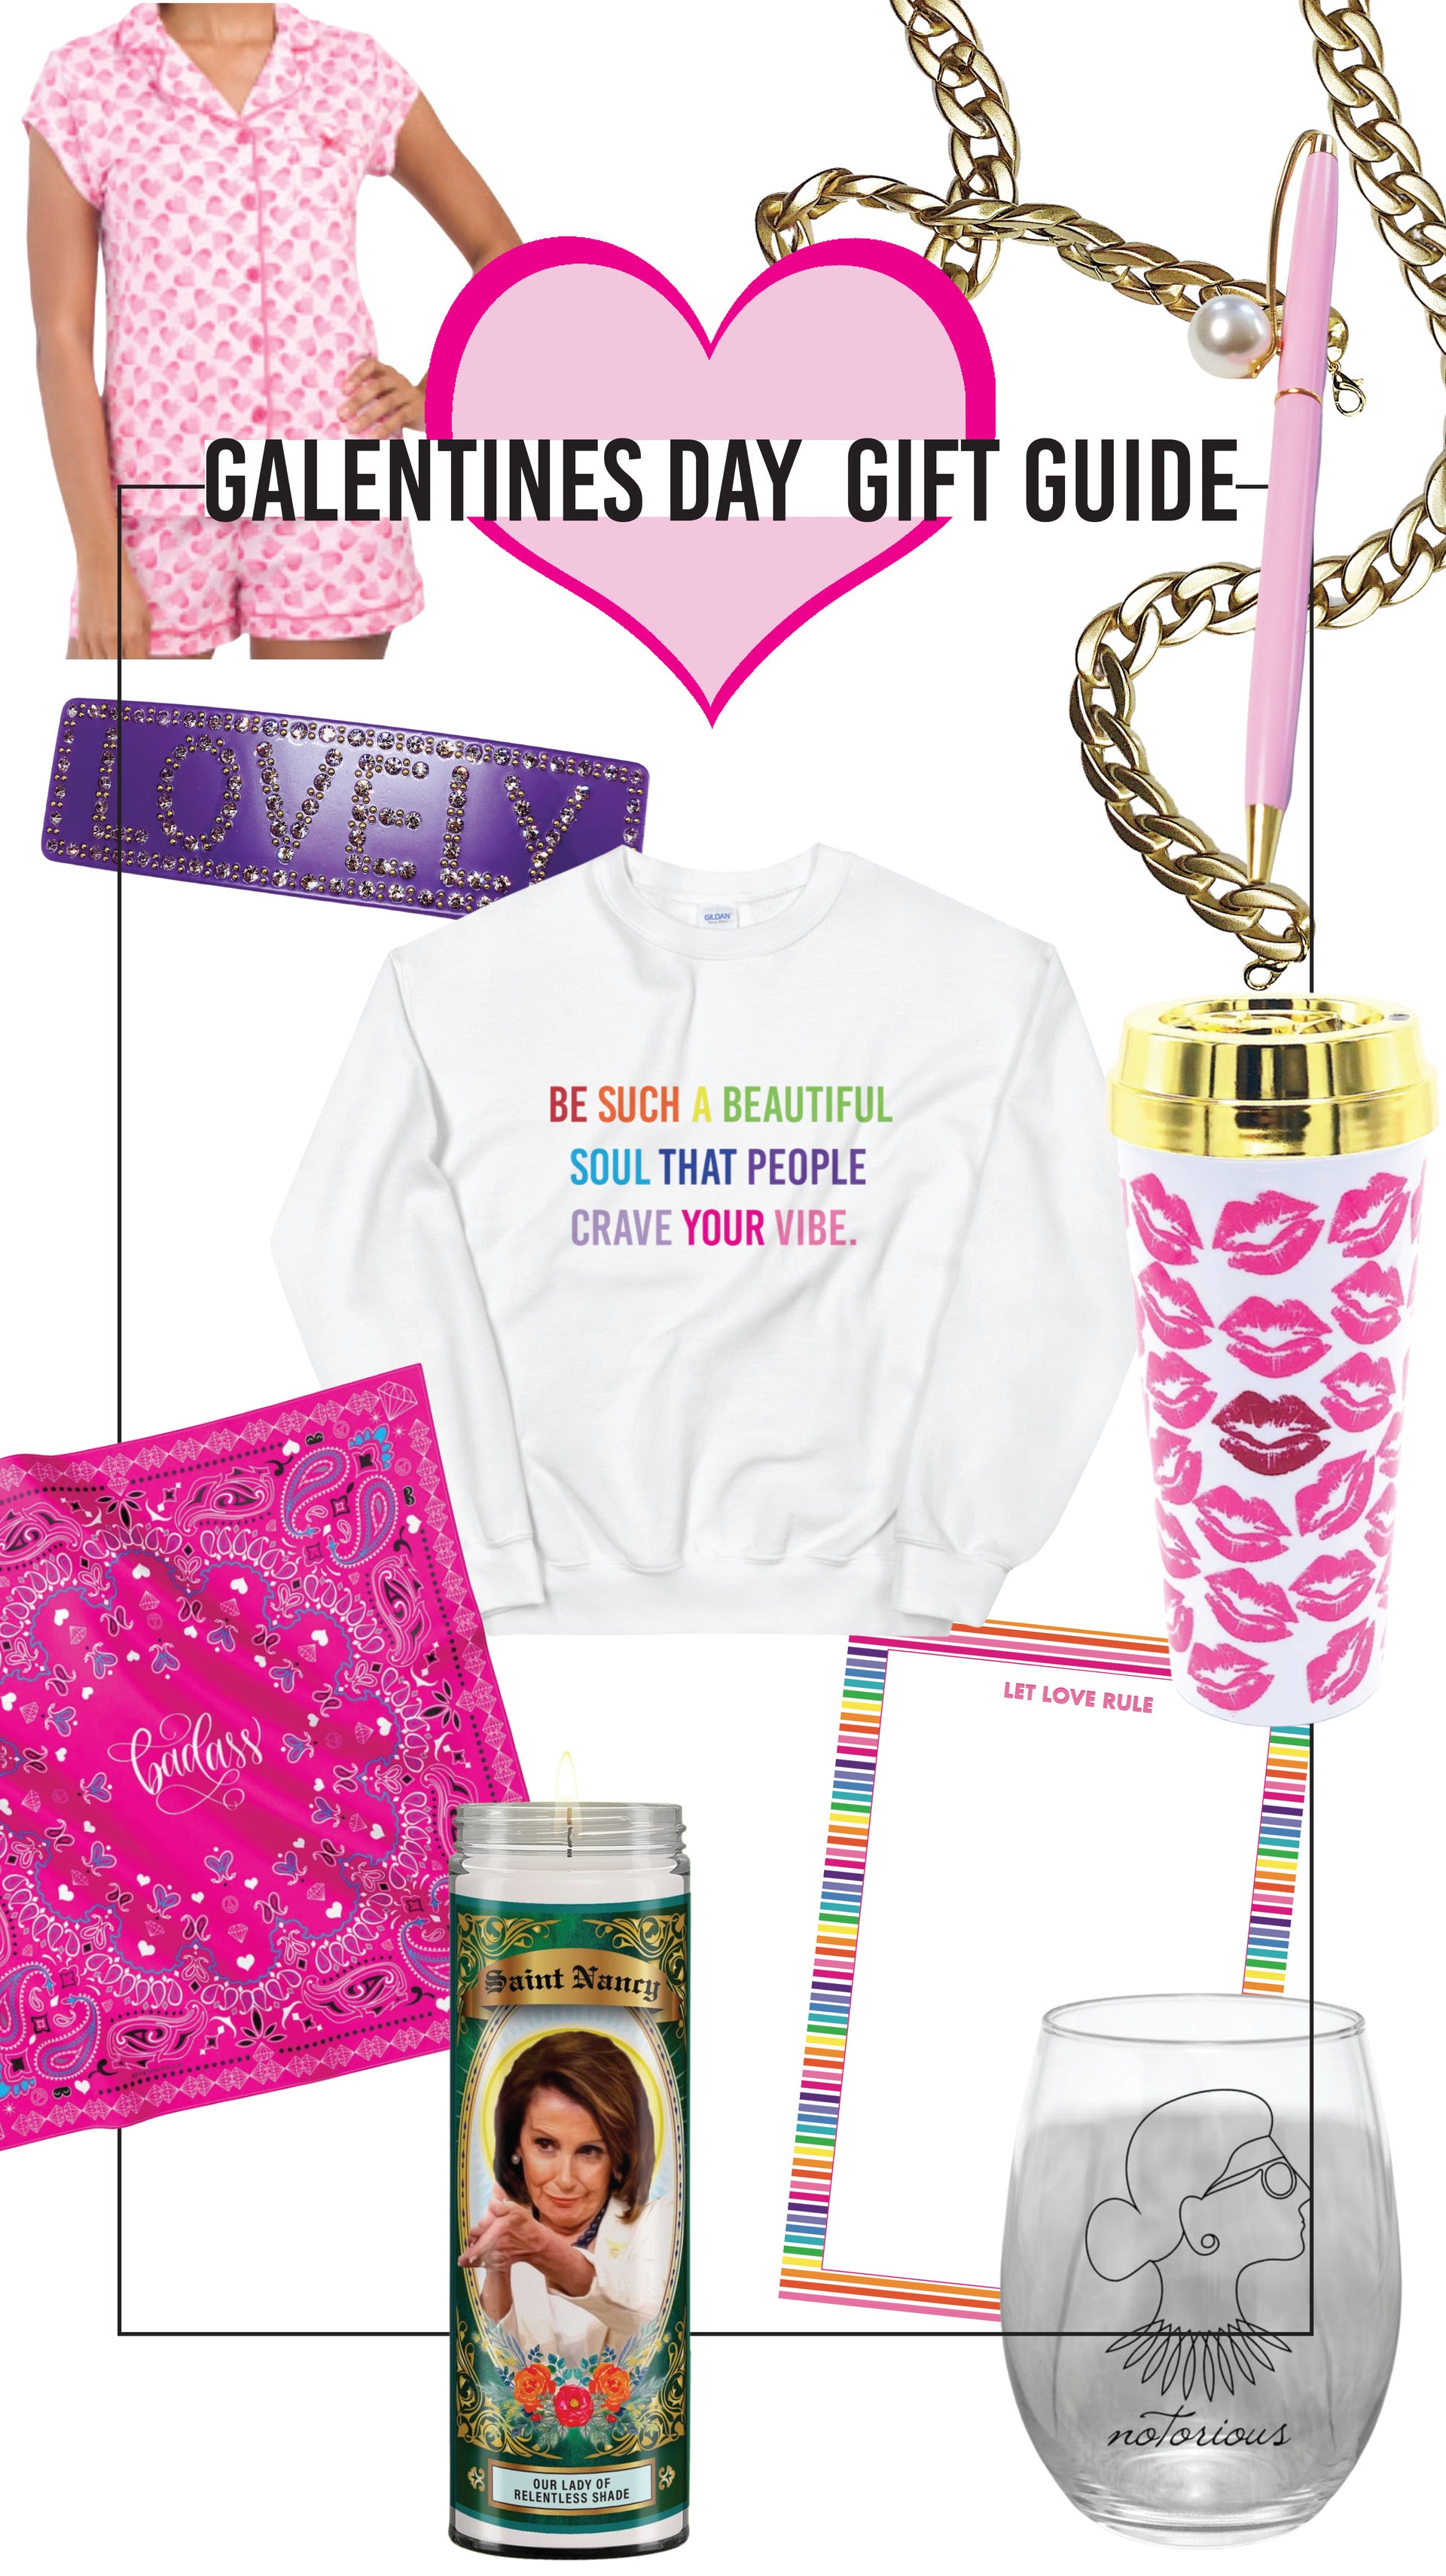 Galentine's Day Gift Guide 💗💗💗